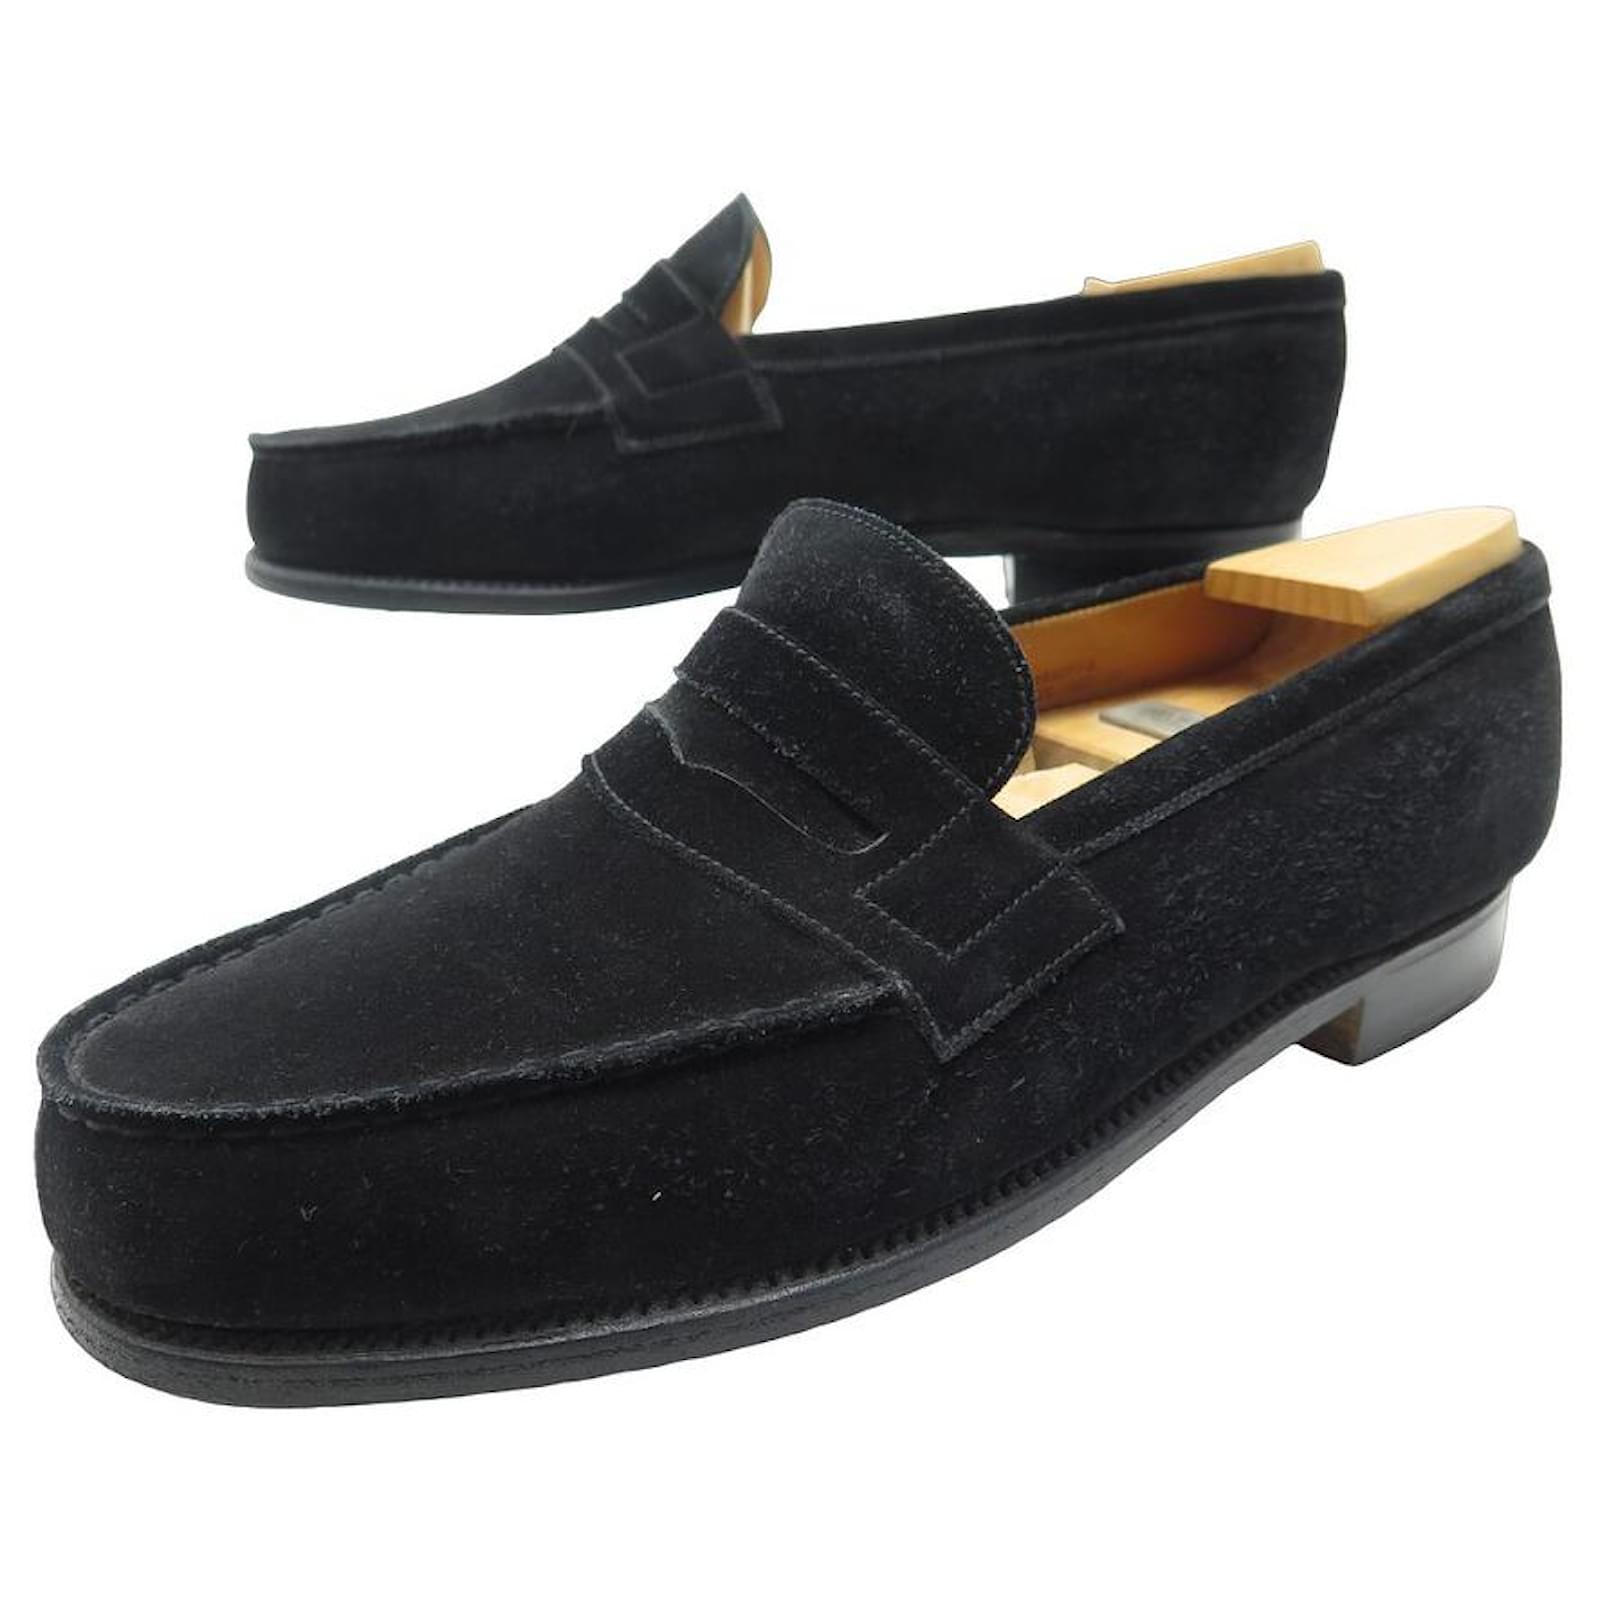 JM WESTON SHOES 180 Church´s Loafers 7.5D 41.5 SUEDE LOAFERS SHOES SHOES